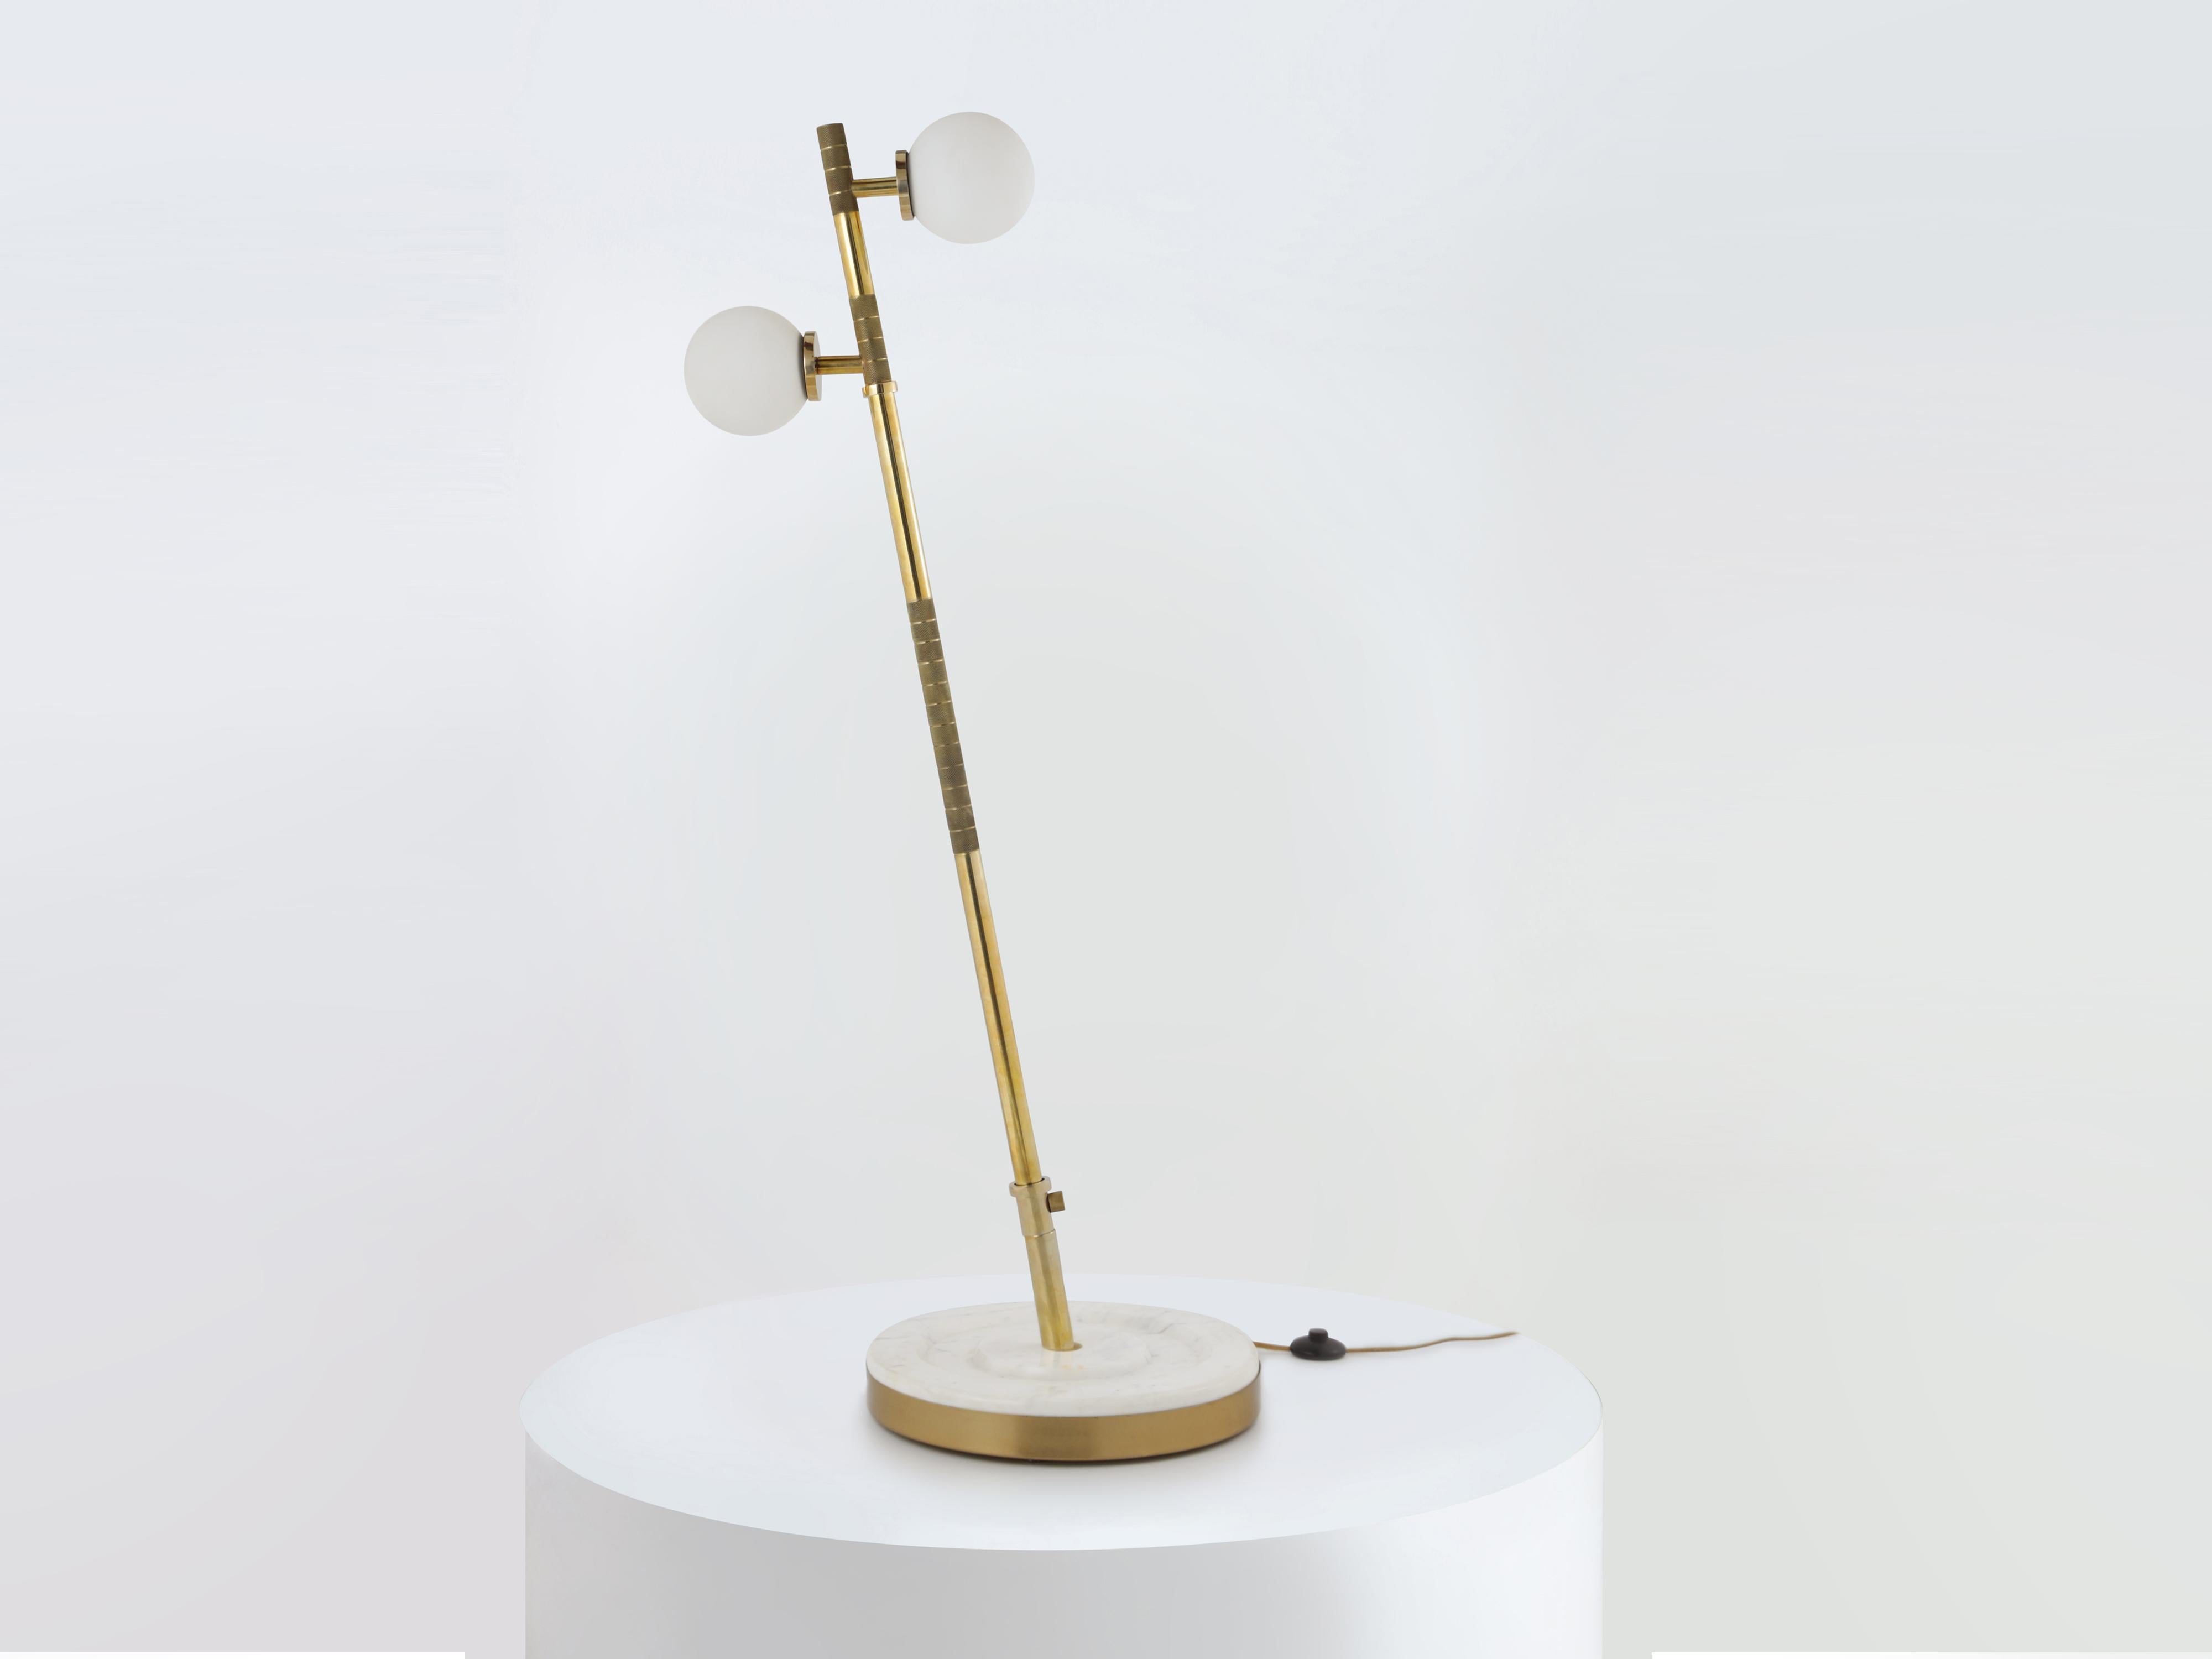 Temptation is the Devil in disguise, just like our Barbell Floor Lamp. Disguising your gym rat personality into a work of art, get ready to lift your aesthetics and not just your weights. A striking addition to your space that brings a sense of